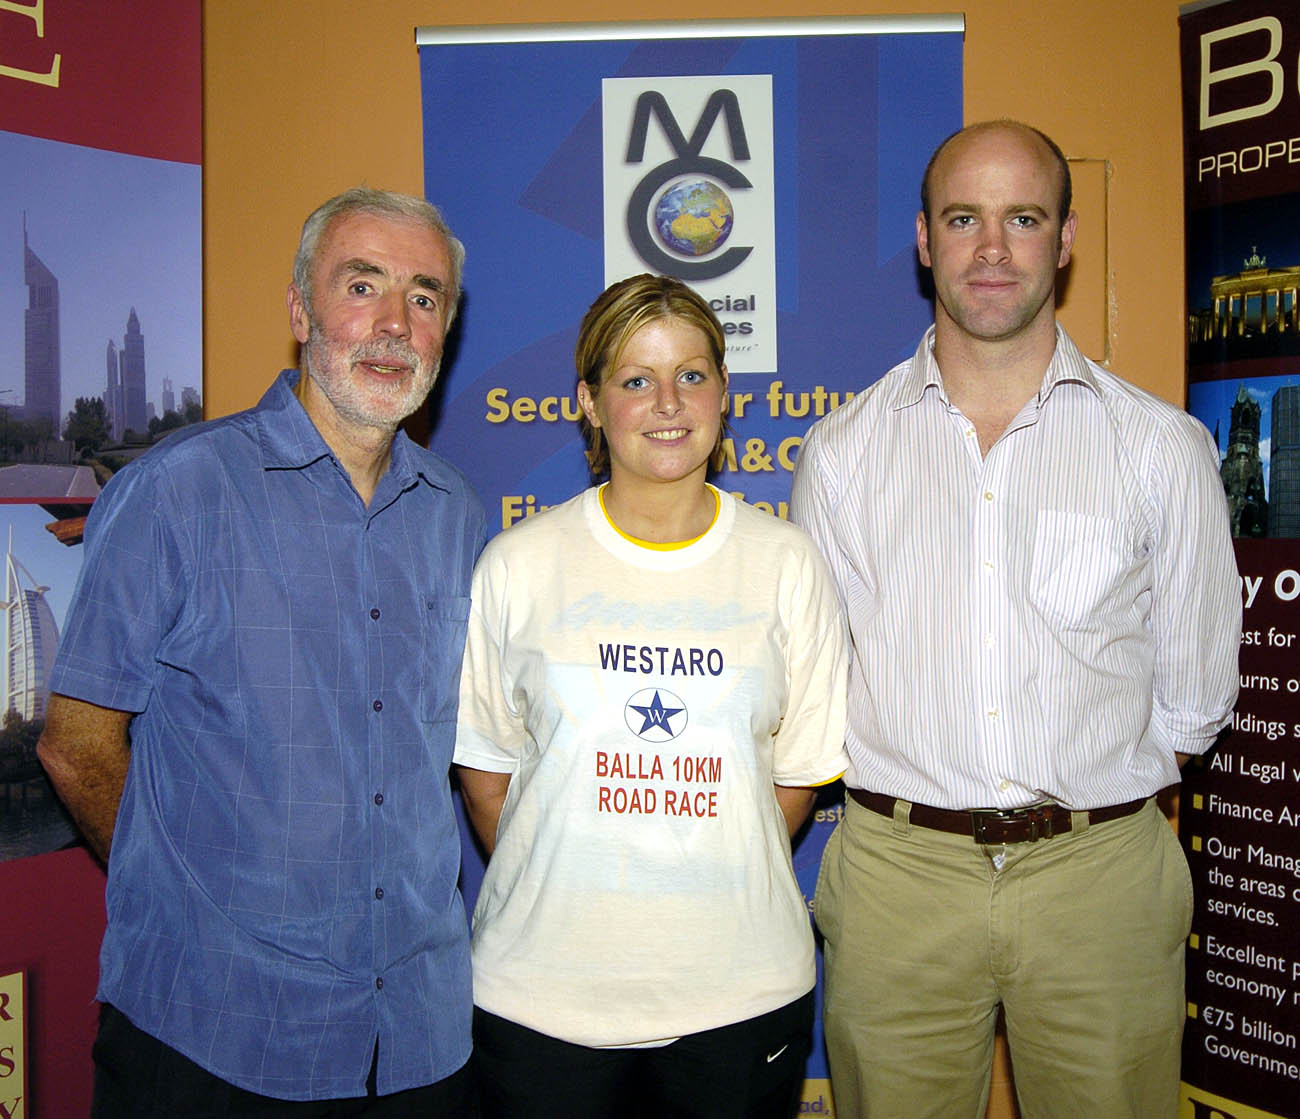 Balla 13th Annual 10K Road Race 2007, a group of winners of the Mens Over 60 Section pictured with some of the sponsors L-R: Michael Courell 1st,  Denise McIntyre Elvery Sports, Sponsor Clive Casey Premier Estates Maloney Sponsor, Photo  Ken Wright Photography 2007